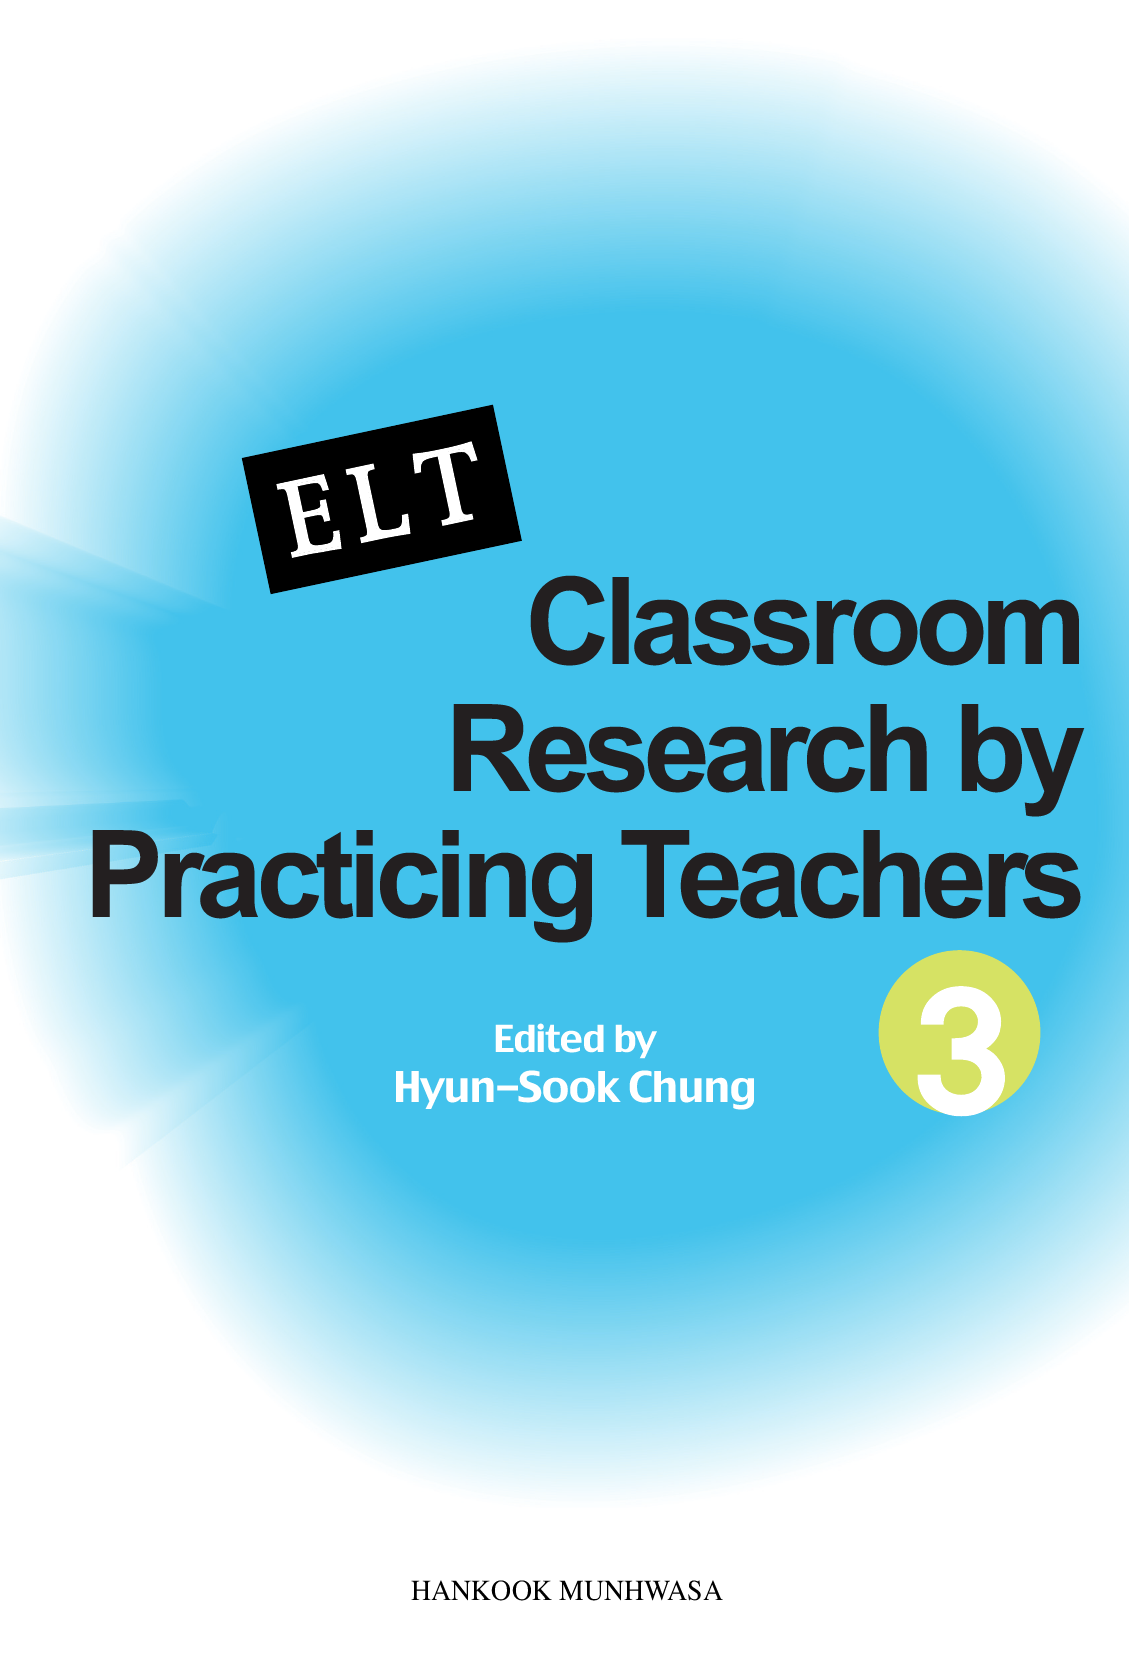 ELT CLASSROOM RESEARCH BY PRACTICING TEACHERS. 3